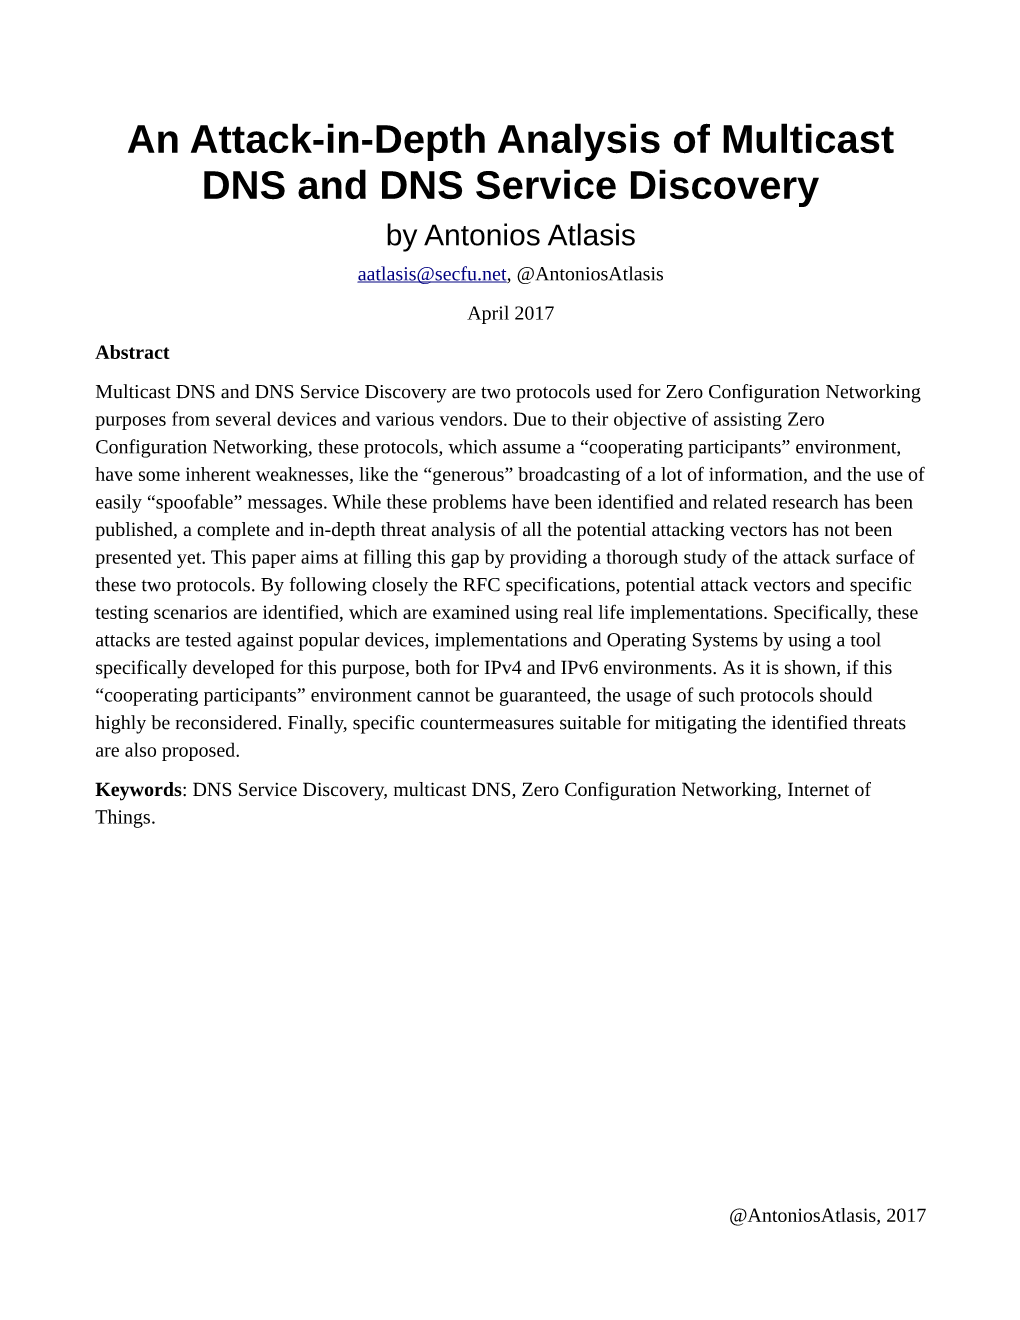 An Attack-In-Depth Analysis of Multicast DNS and DNS Service